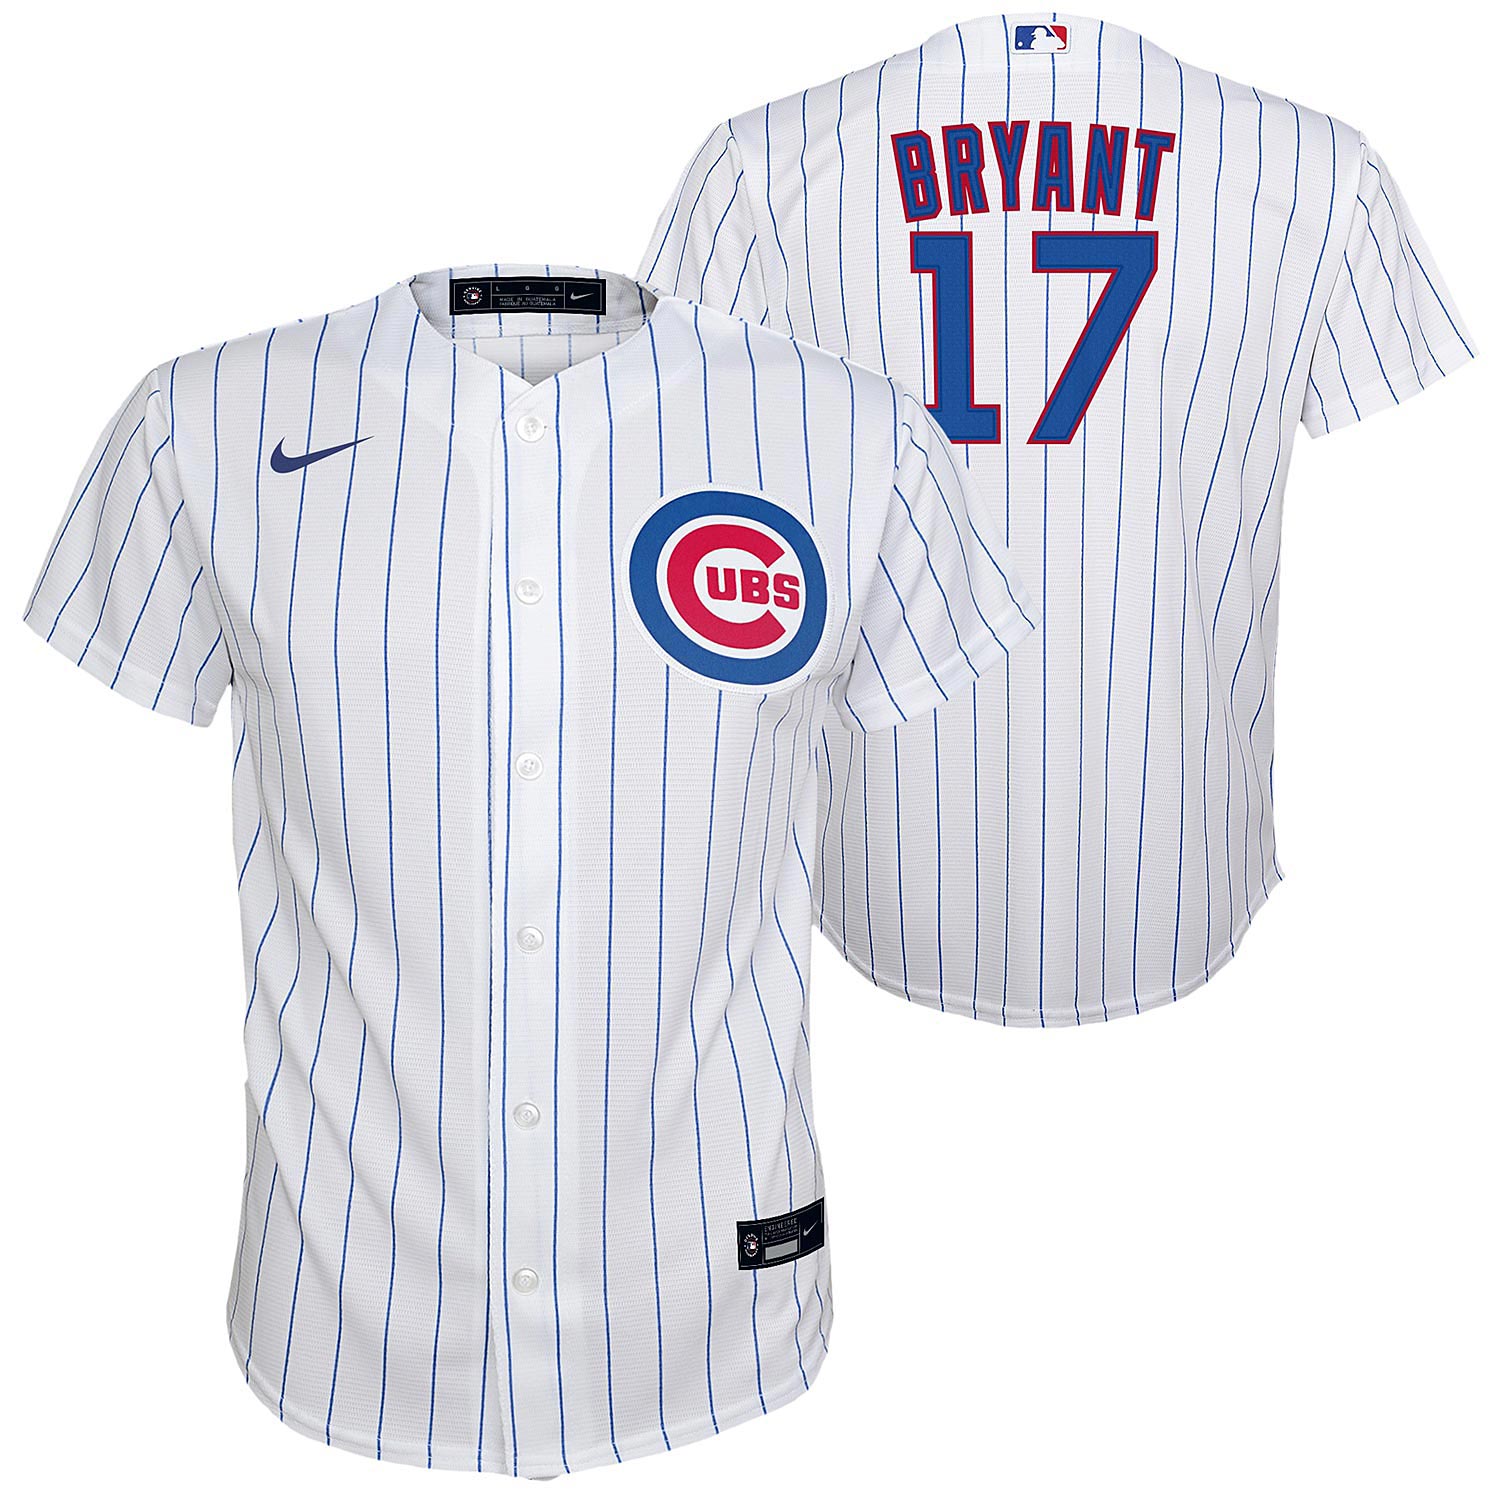 kris bryant youth jersey